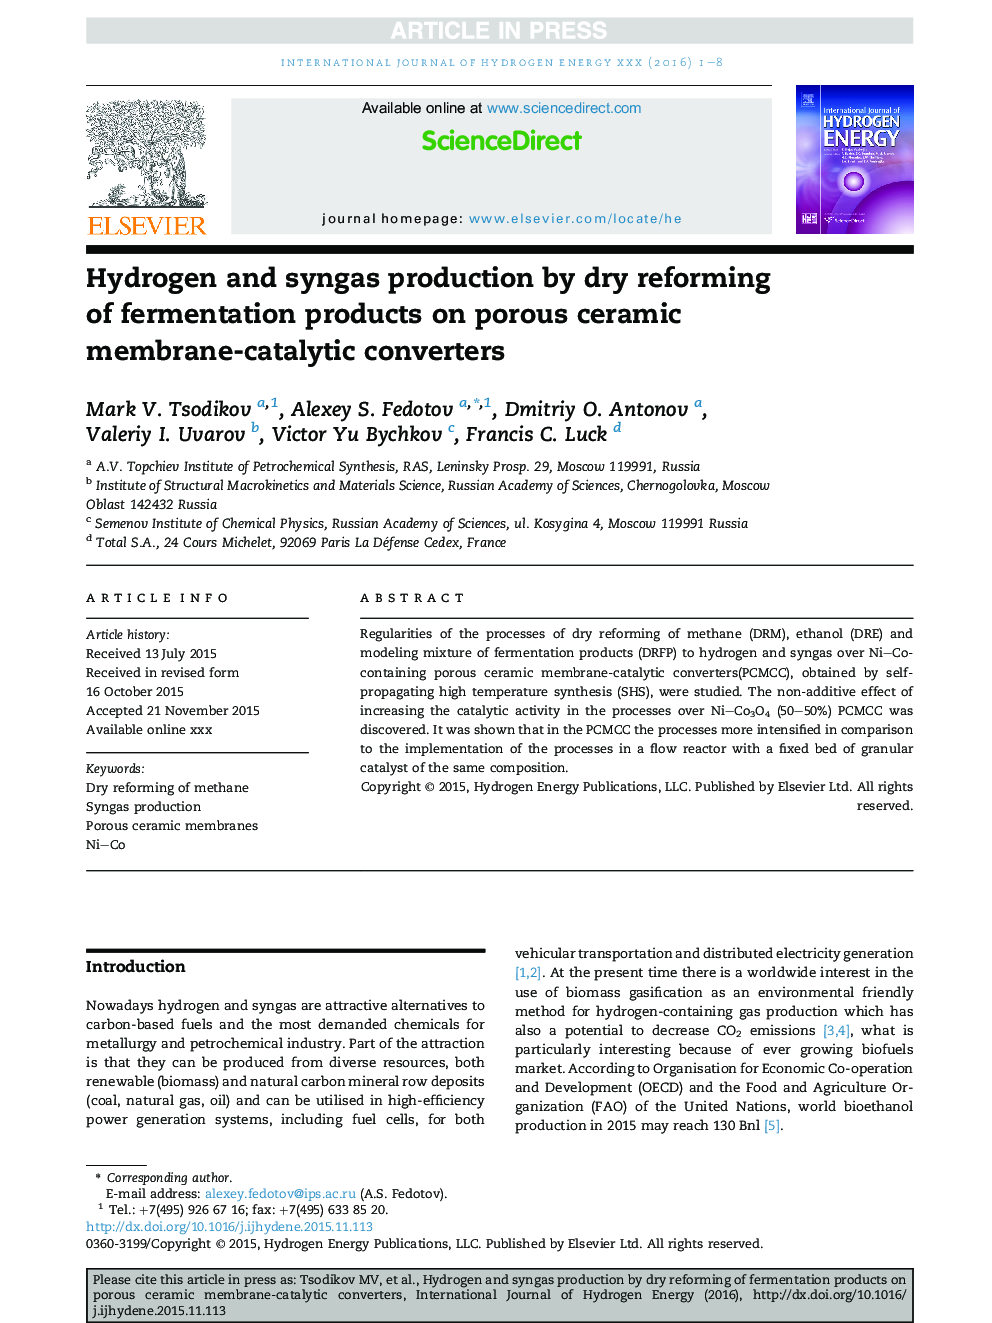 Hydrogen and syngas production by dry reforming of fermentation products on porous ceramic membrane-catalytic converters